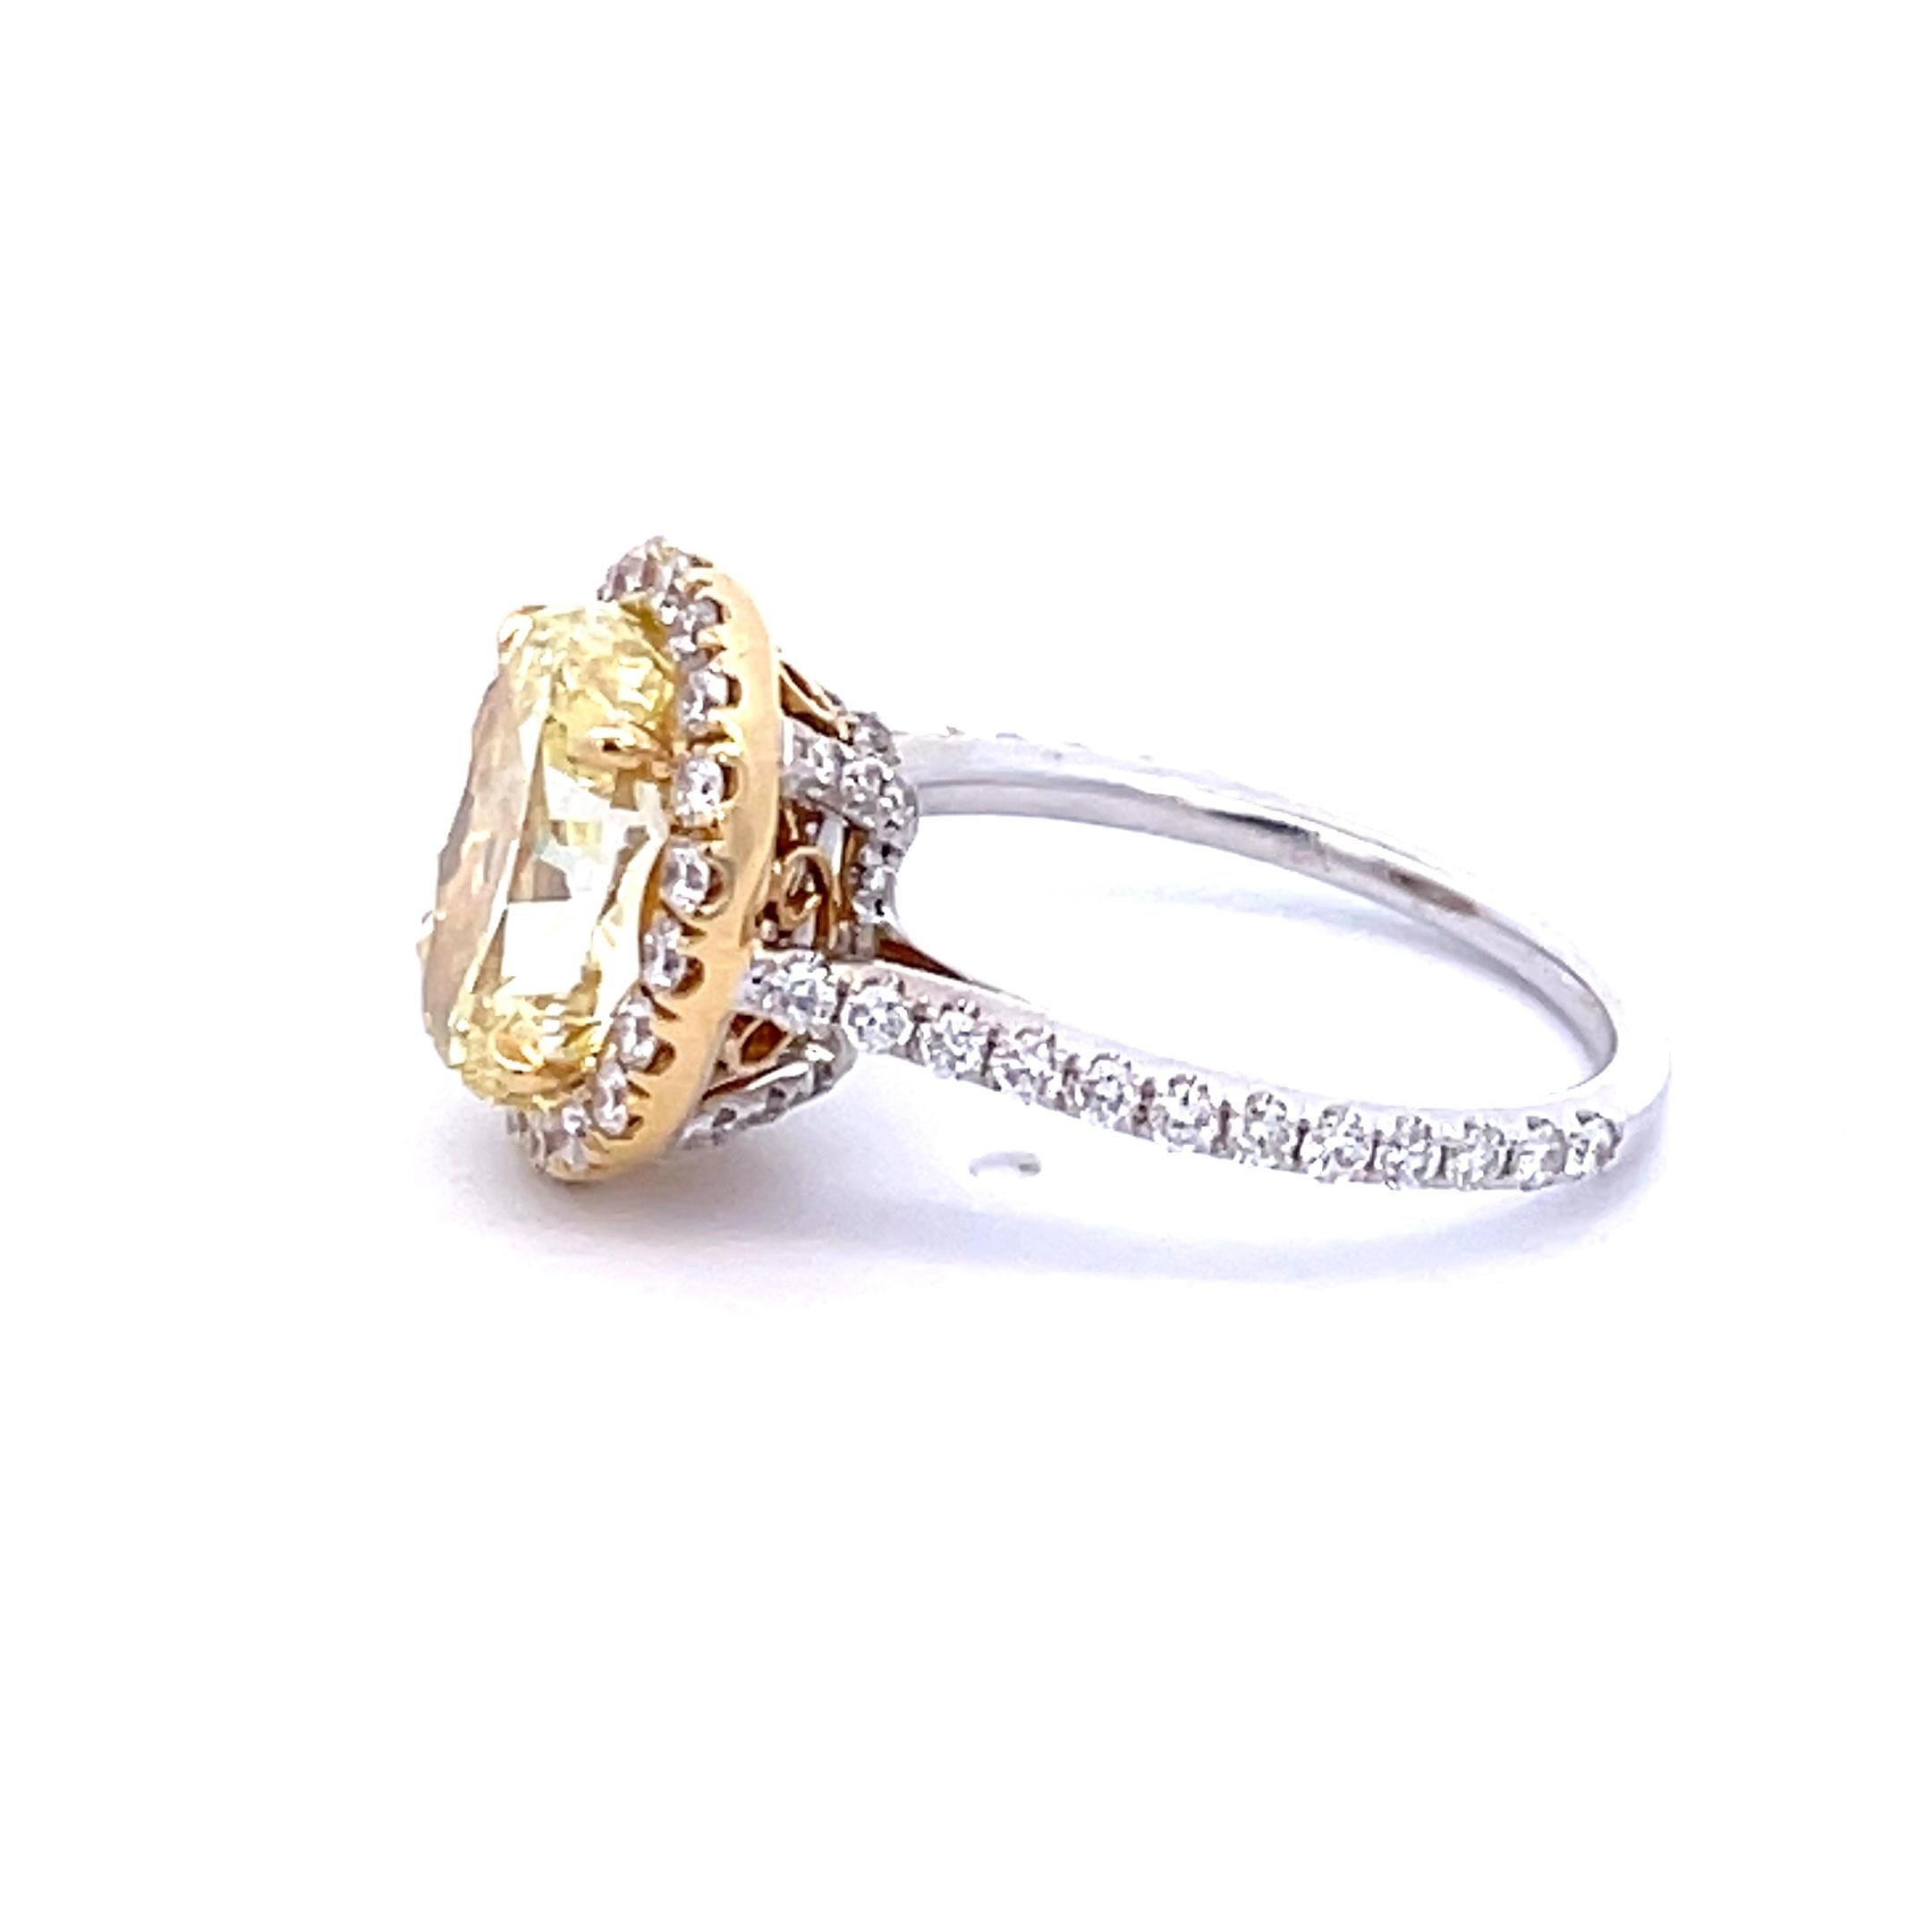 Fall in love with this GIA Certified 4.13 Carat Fancy Yellow Oval Diamond Engagement Ring. The 